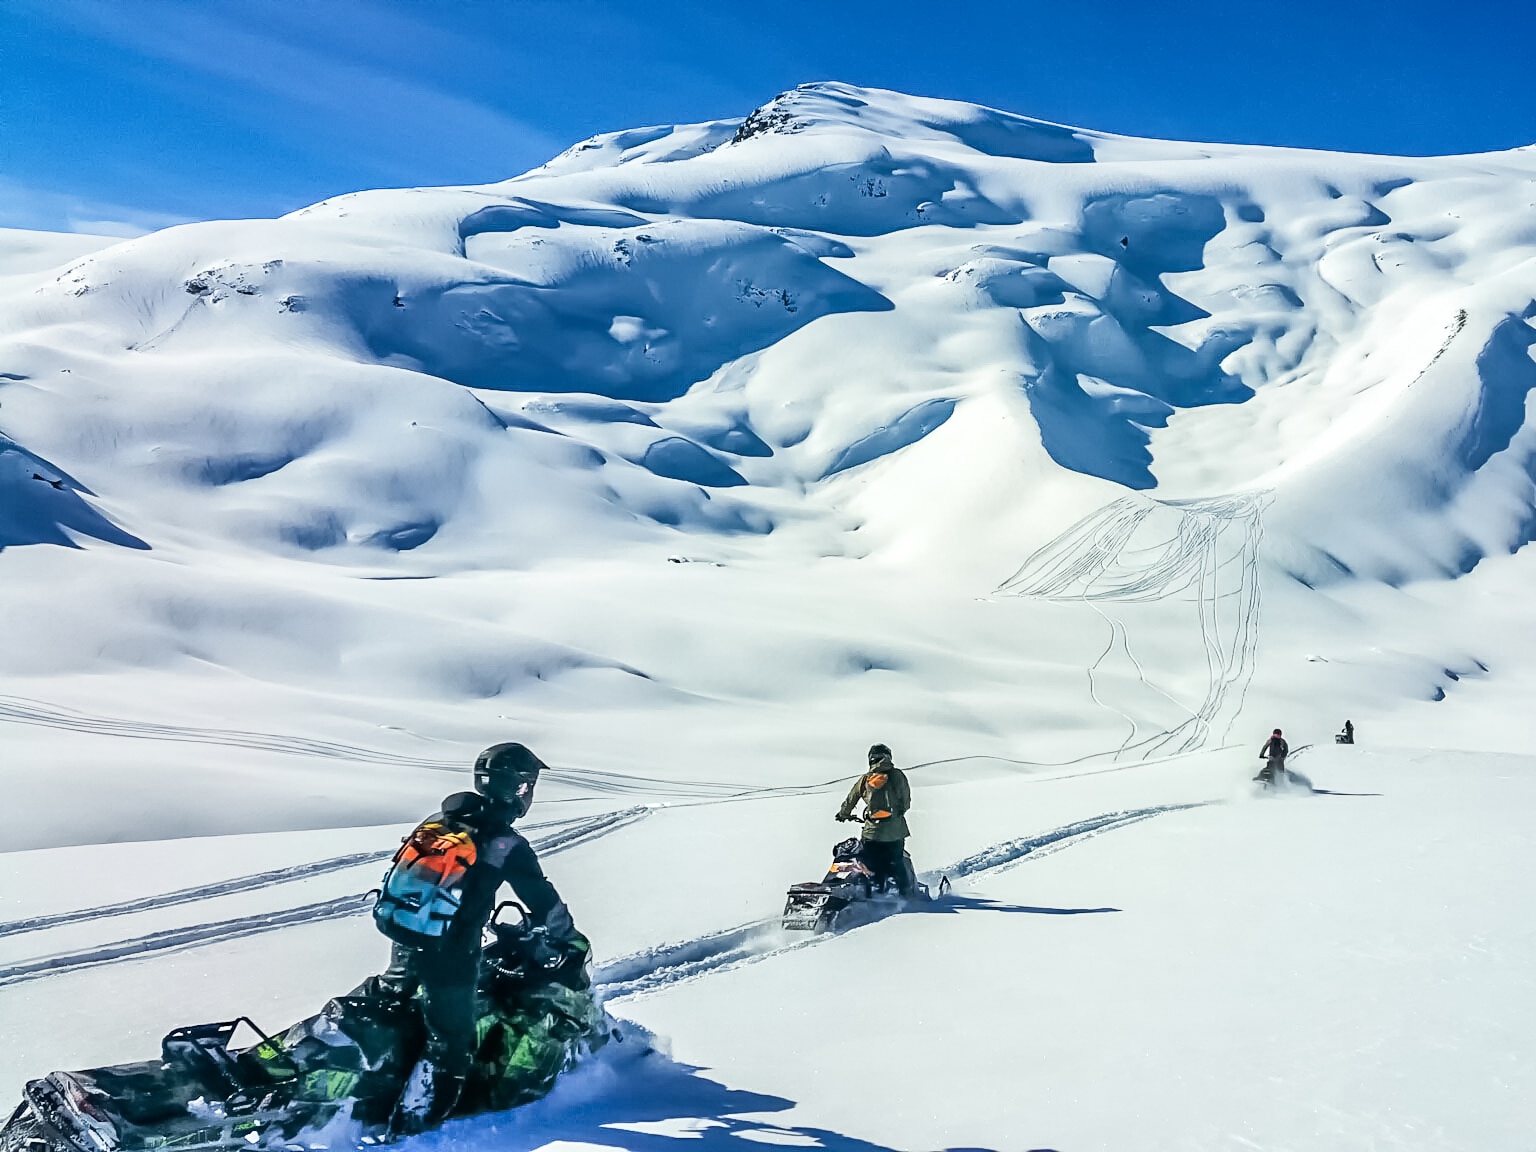 Non-stop, adrenaline-filled action in Whistler, BC